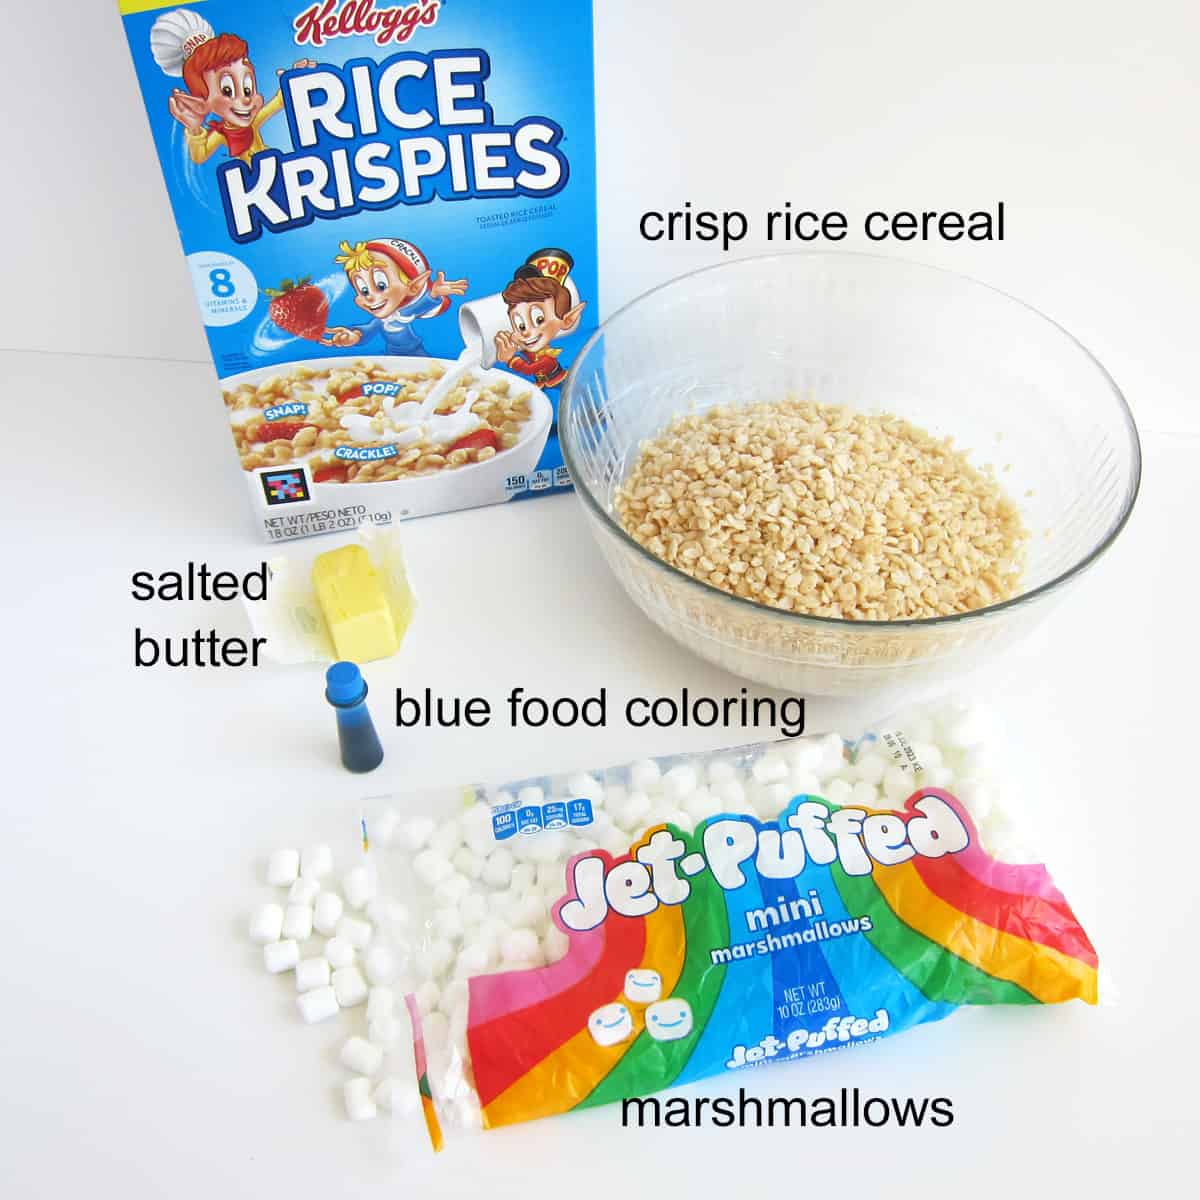 blue rice krispie treats recipe ingredients including blue food coloring, Rice Krispies Cereal, marshmallows, and butter.